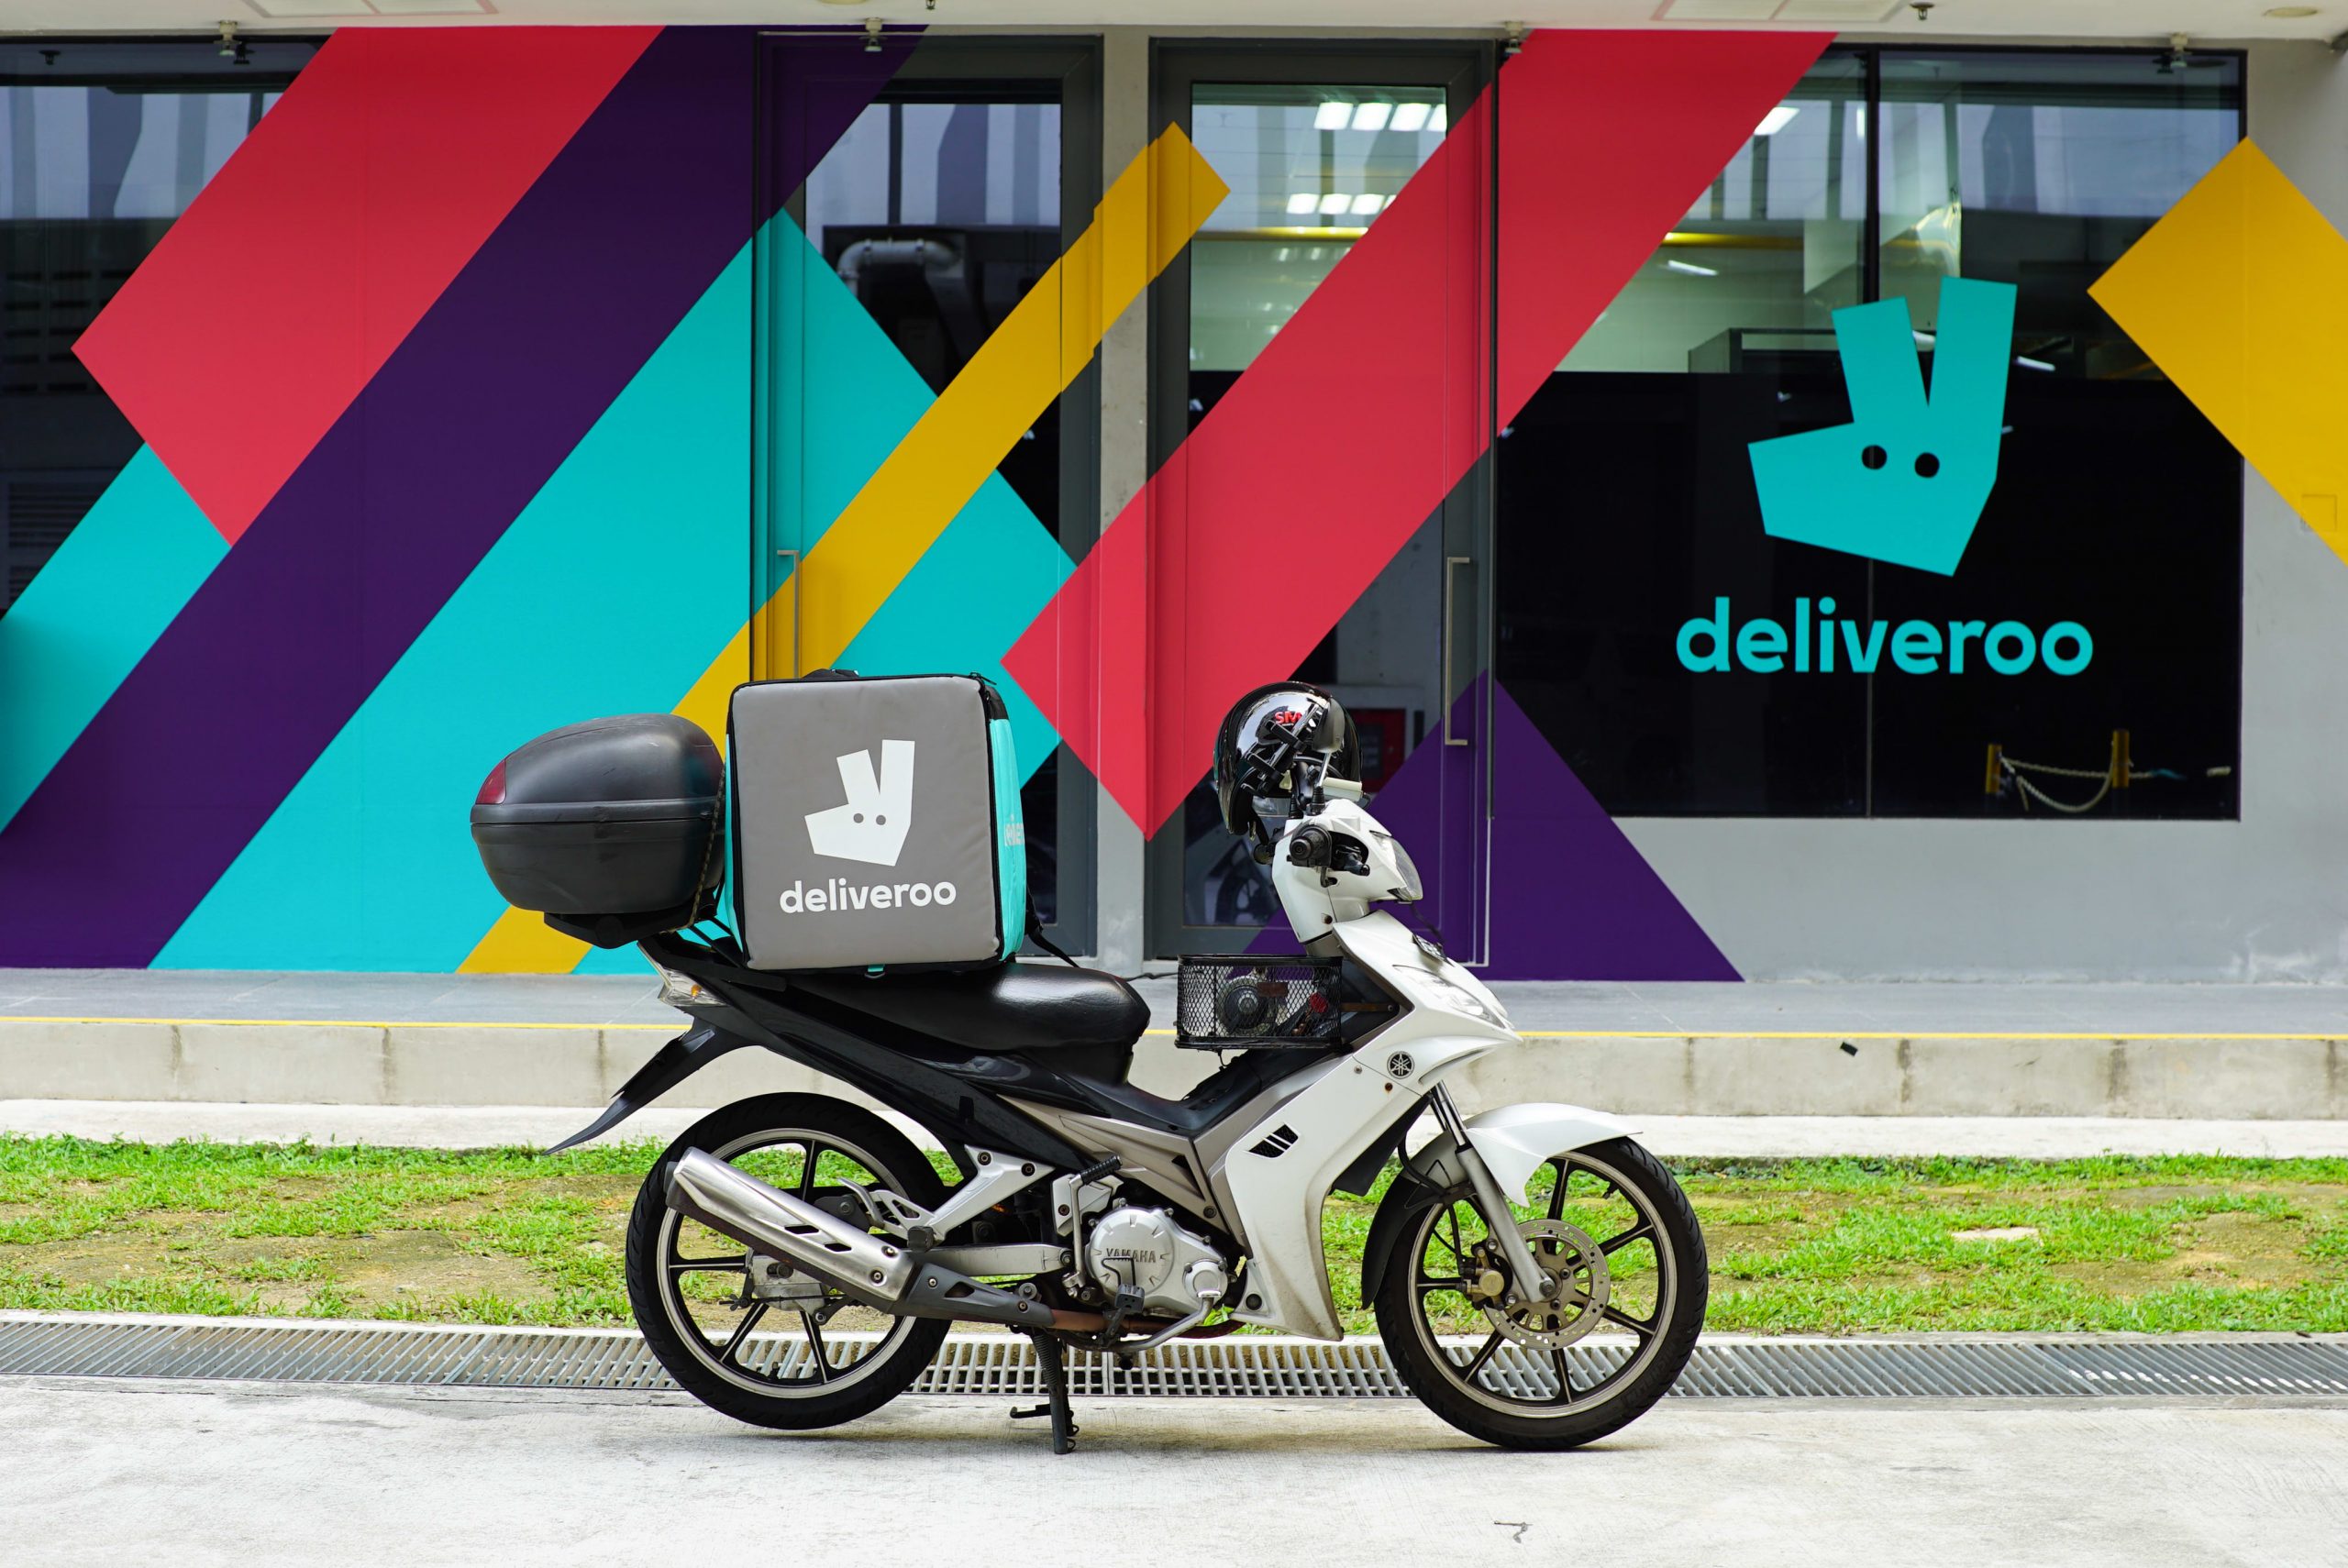 Deliveroo Jobs: How To Work In Food Delivery Service 10